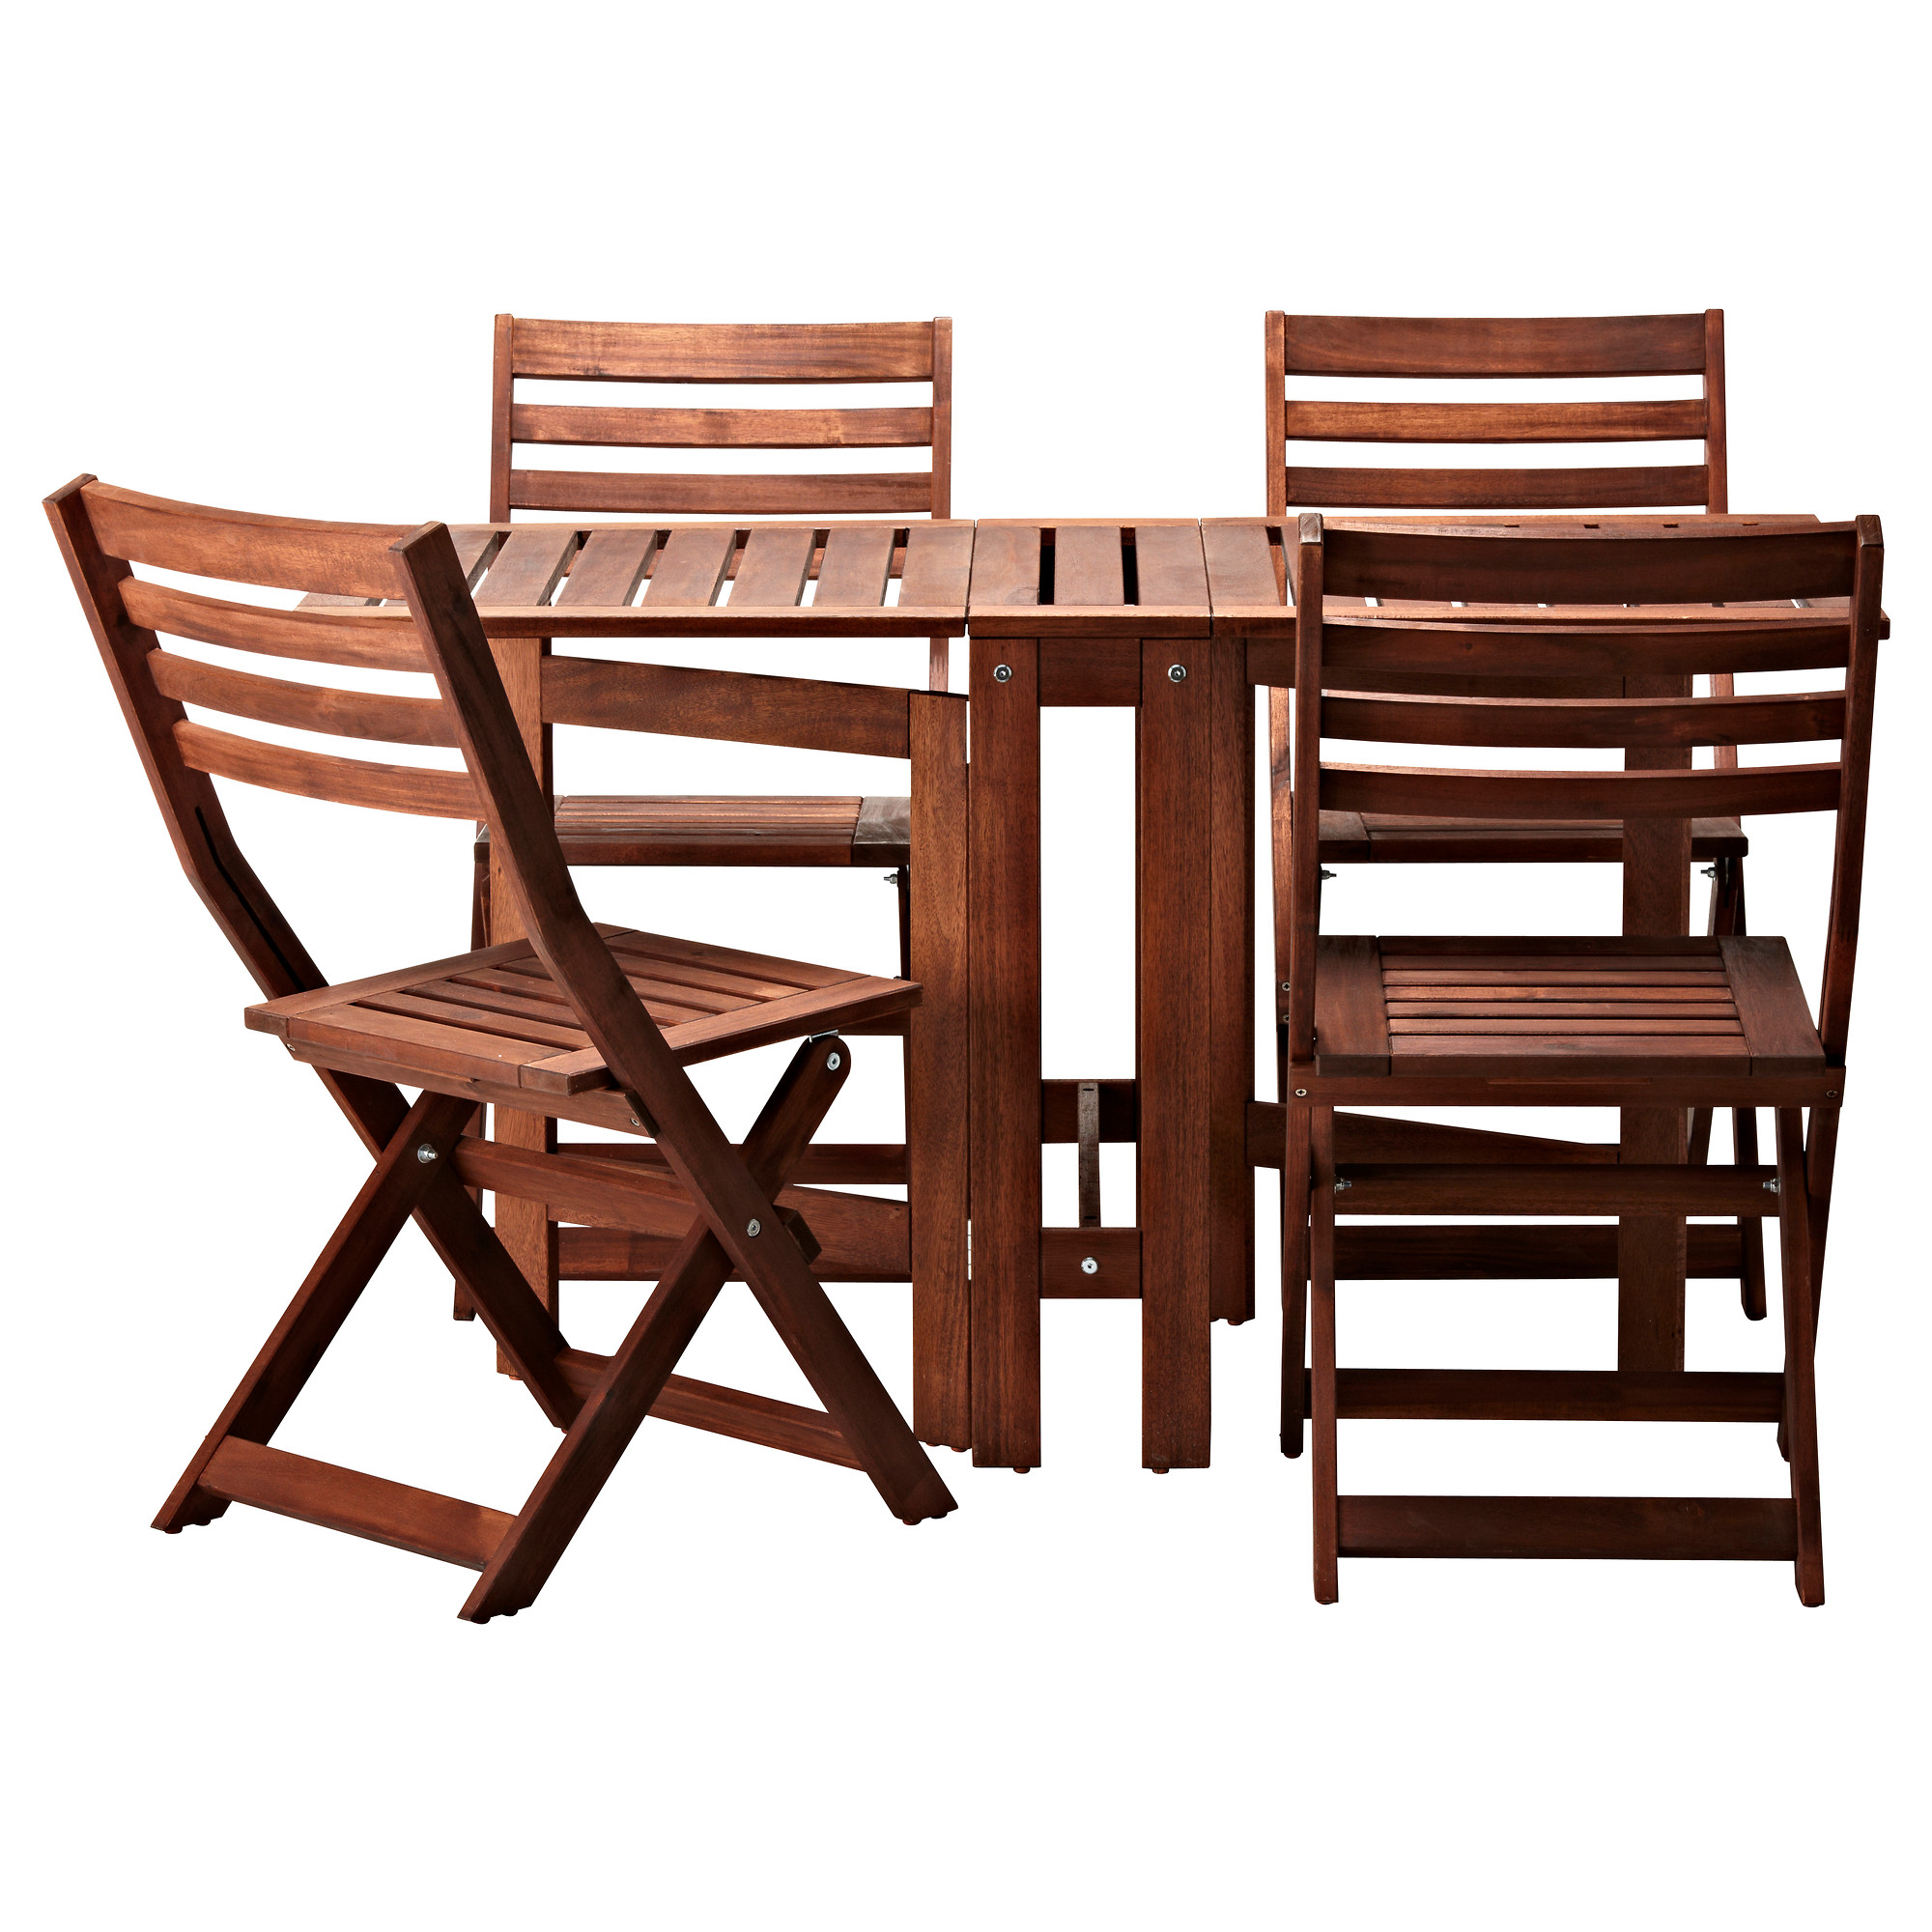 outdoor table and chairs äpplarö table and 4 folding chairs, outdoor, brown stained brown QQFYZMZ